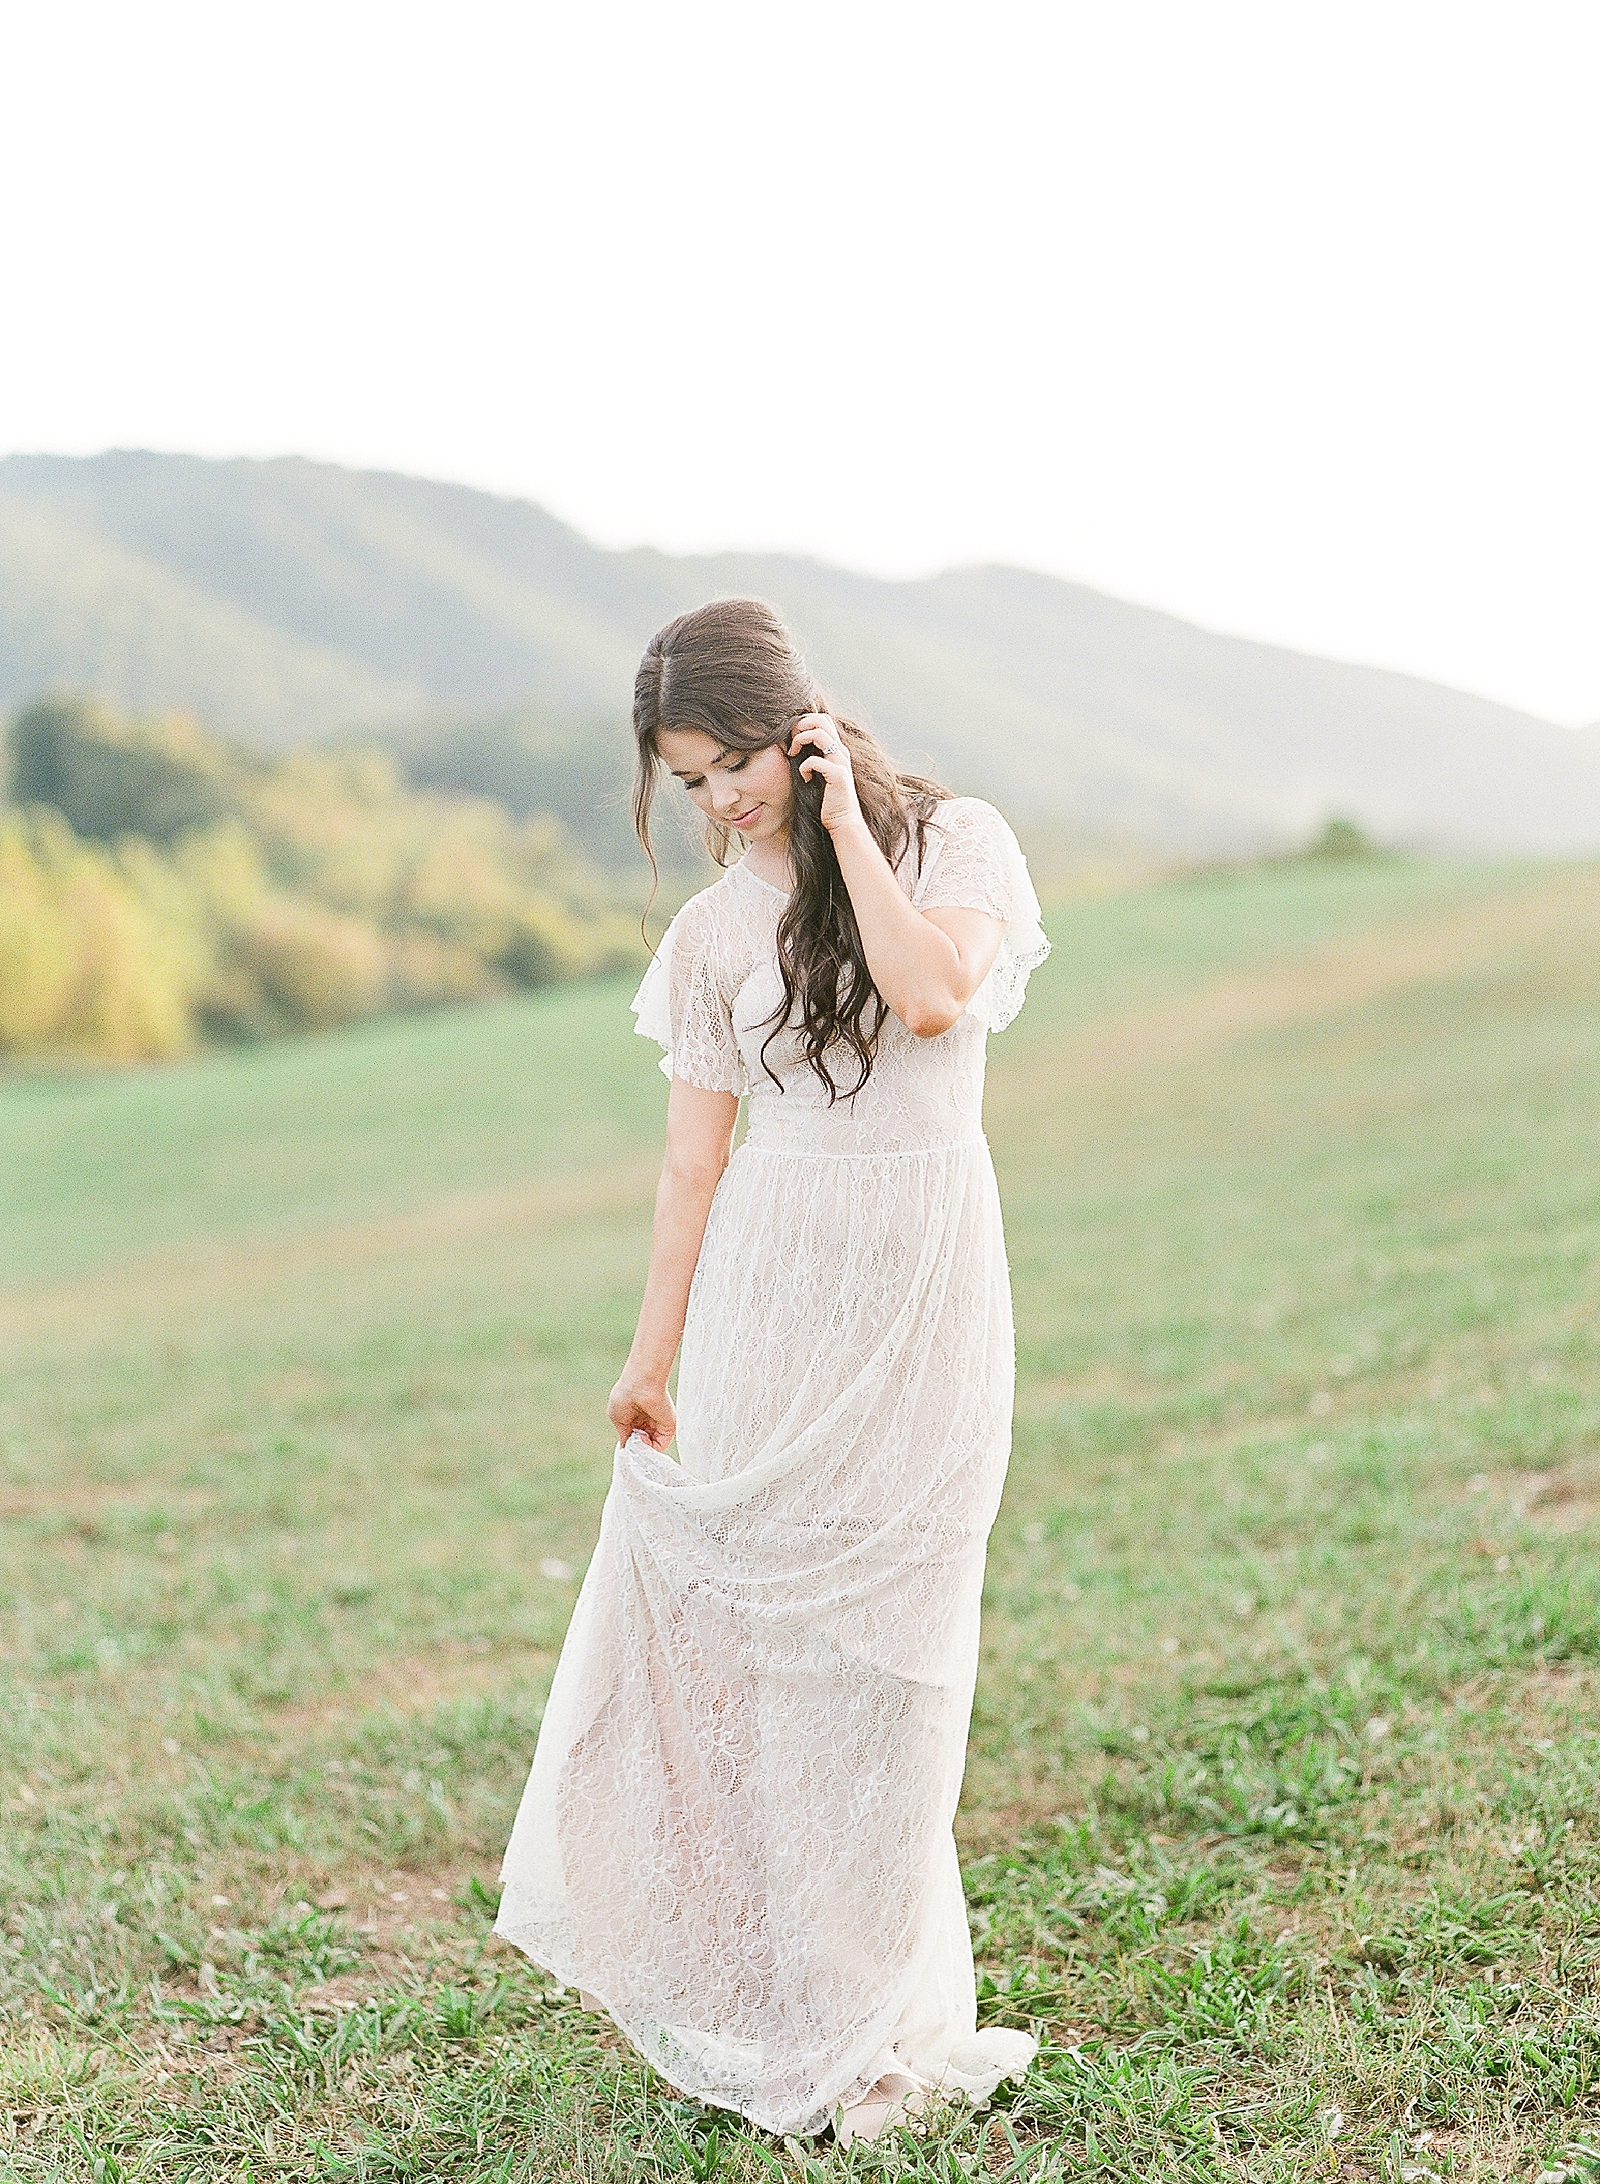 Asheville Wedding Photographer Bridal Editorial Bride Looking Down Holding Dress Photo